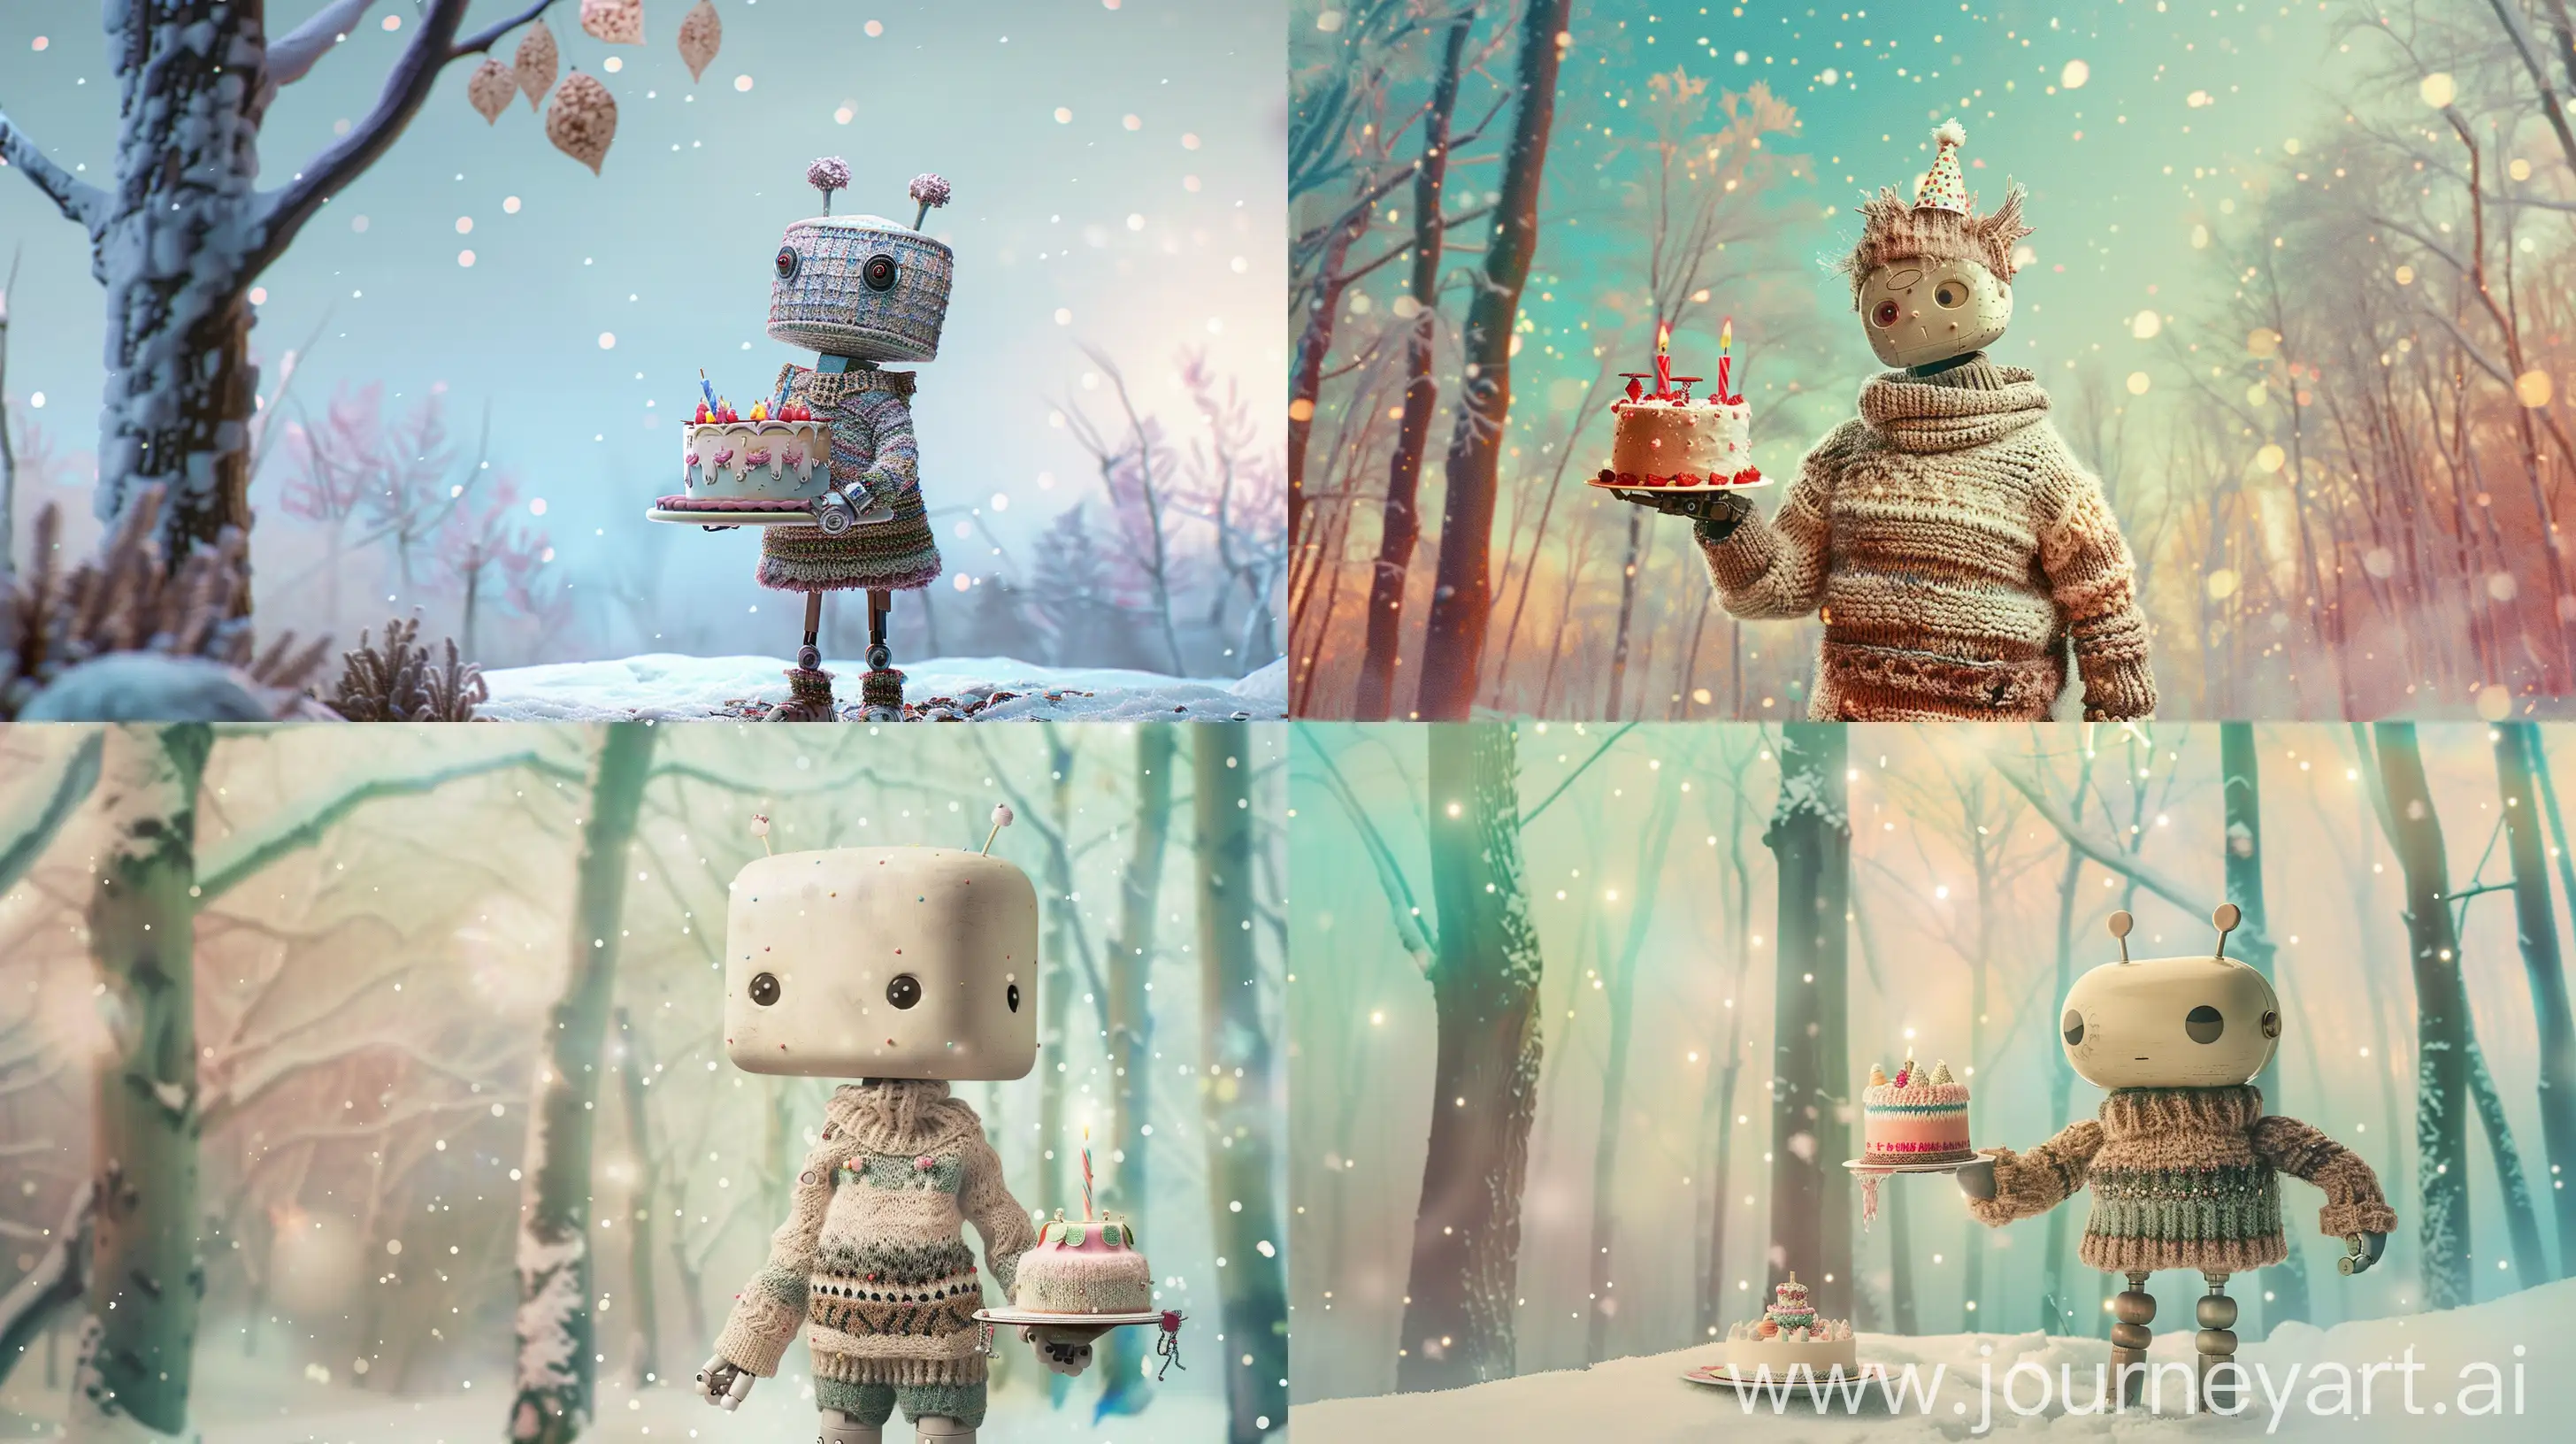 an enchanting image of a charming woodland robot standing amidst a serene snowy forest. The robot is adorned in cozy and intricate knitted clothing, exuding a sense of warmth. The scene is set for a delightful birthday celebration, with the robot cheerfully holding a beautifully decorated cake on a festive plate. Above, the sky is dotted with twinkling stars, casting a magical glow on the surroundings. The photography style draws inspiration from Wes Anderson's distinctive pastel colors, creating a dreamy and nostalgic ambiance. The imagery is vibrant and captivating, with careful attention to cinematography to enhance the storytelling. The background features a soft bokeh effect, adding depth and focus to the full-body portrait of the robot, inviting viewers into a whimsical world filled with wonder --ar 16:9